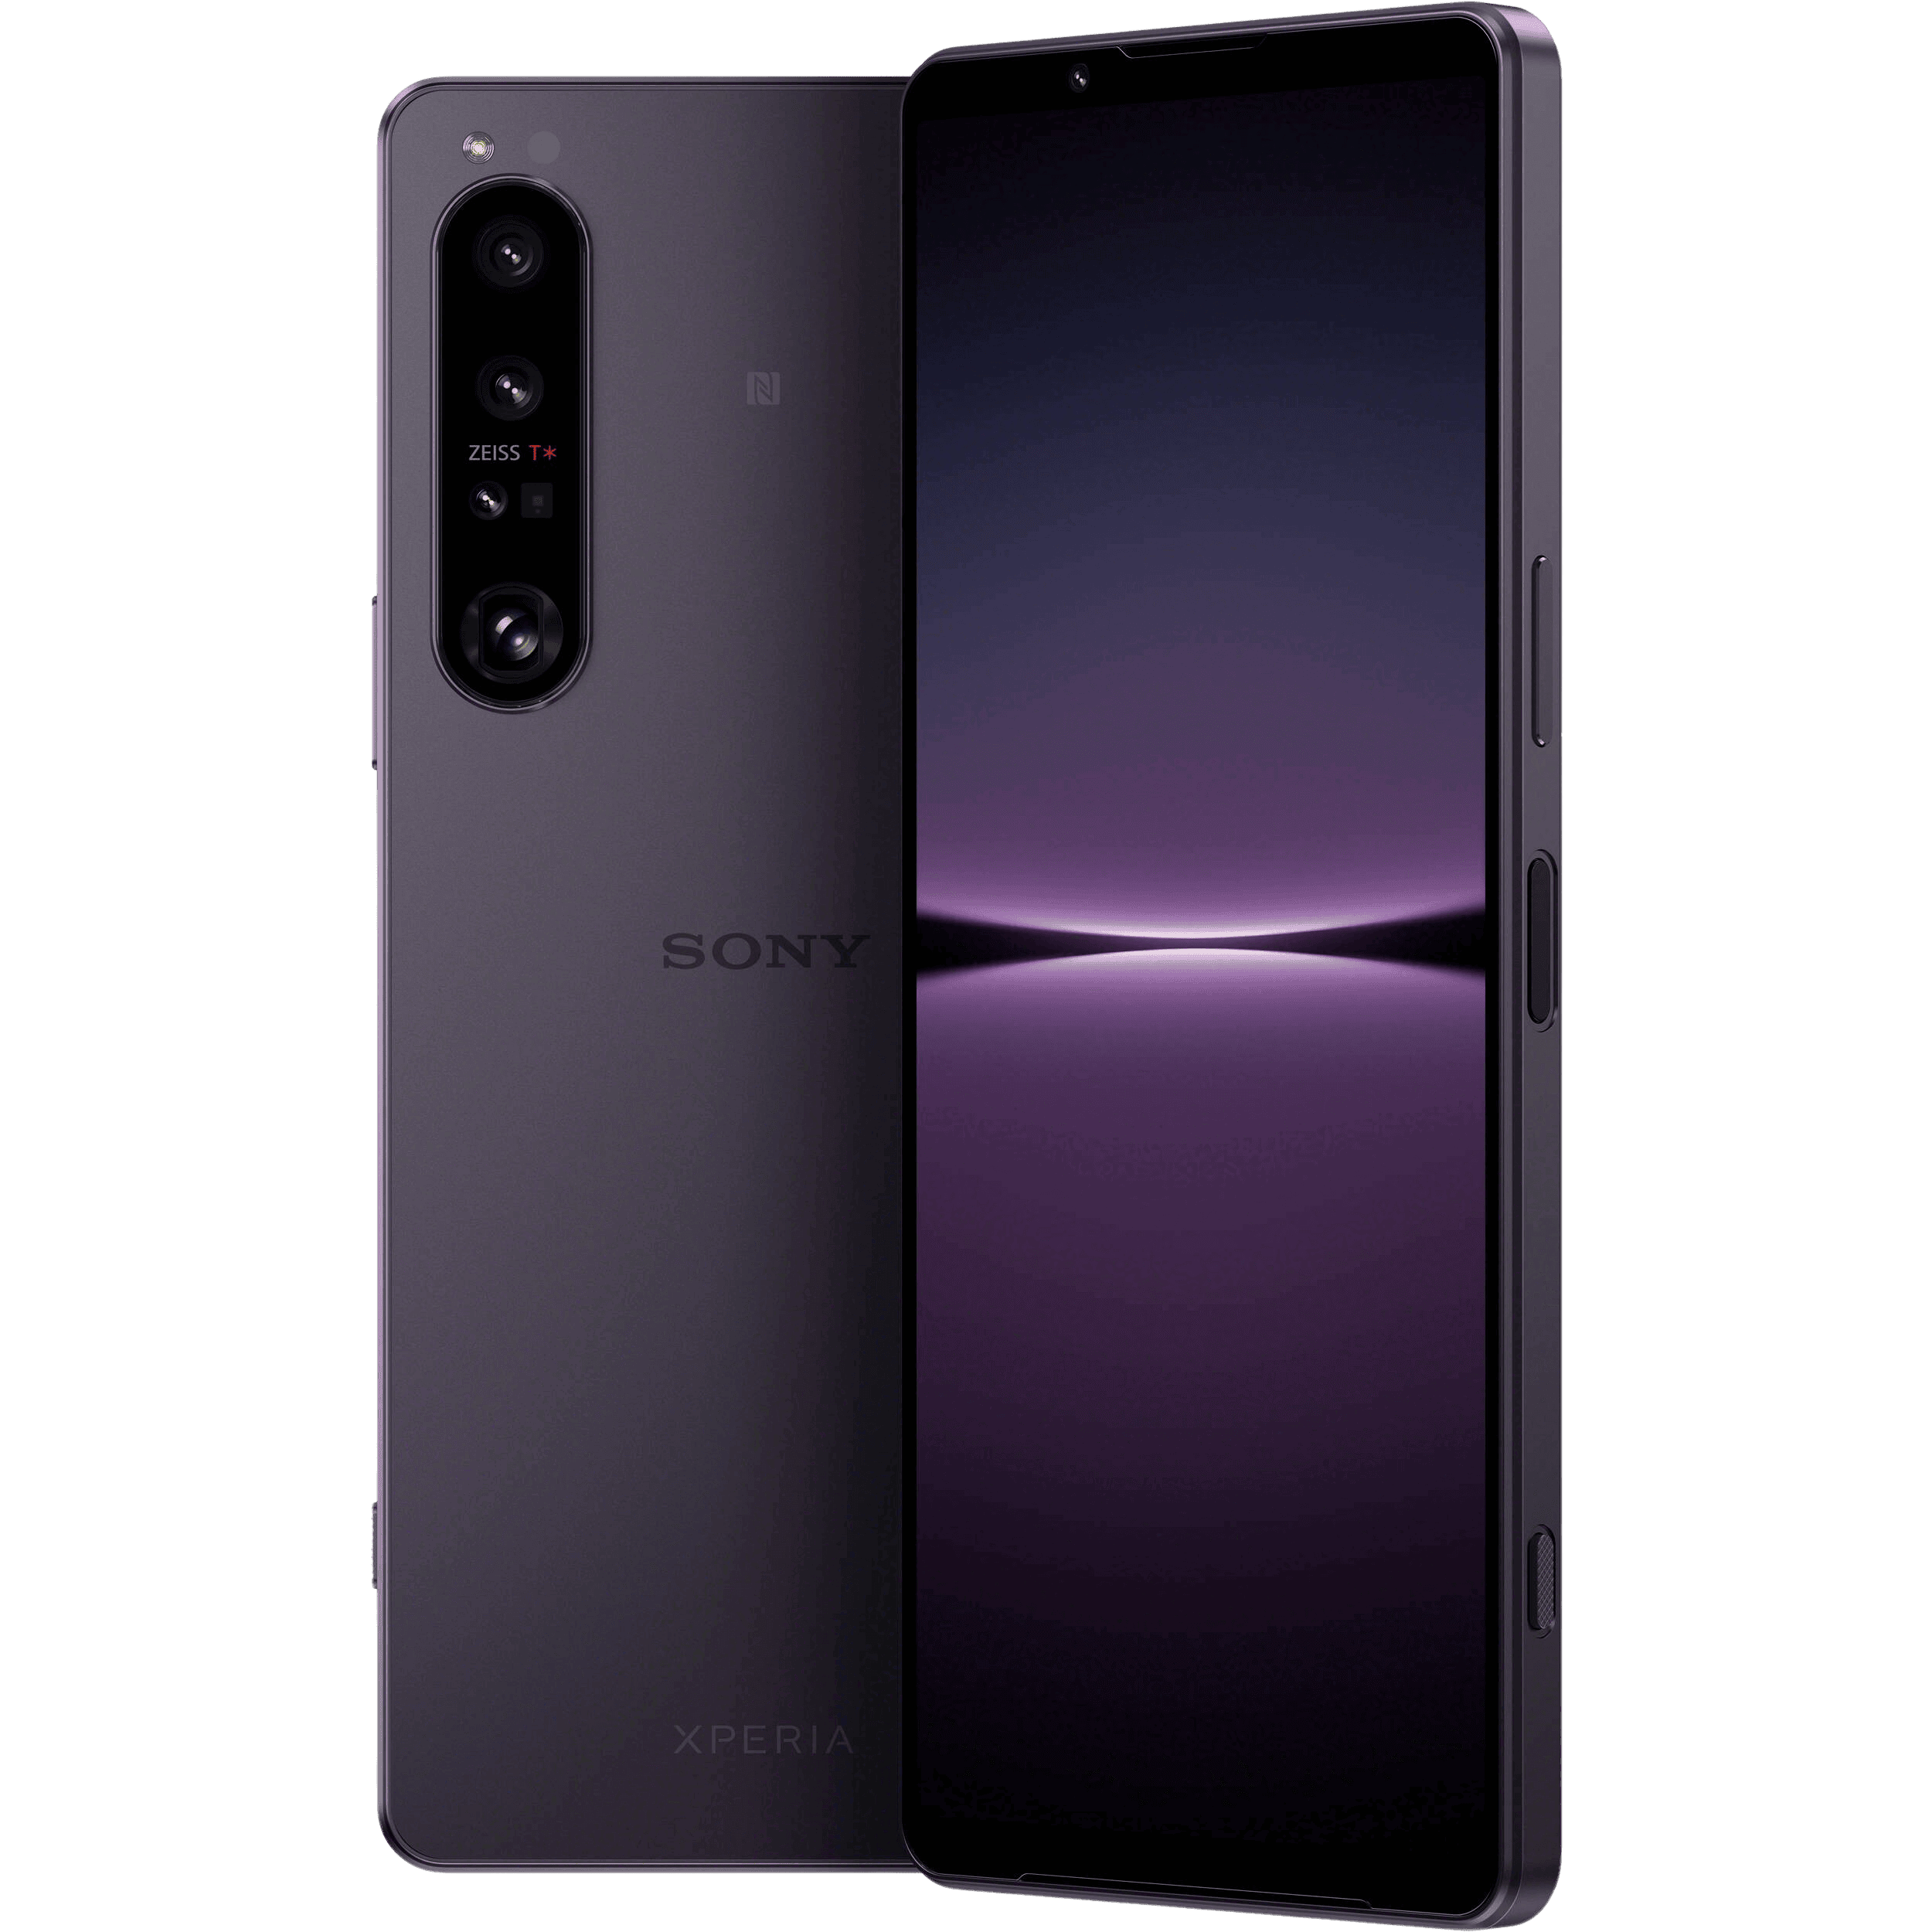 Sony Xperia 1 IV reparation